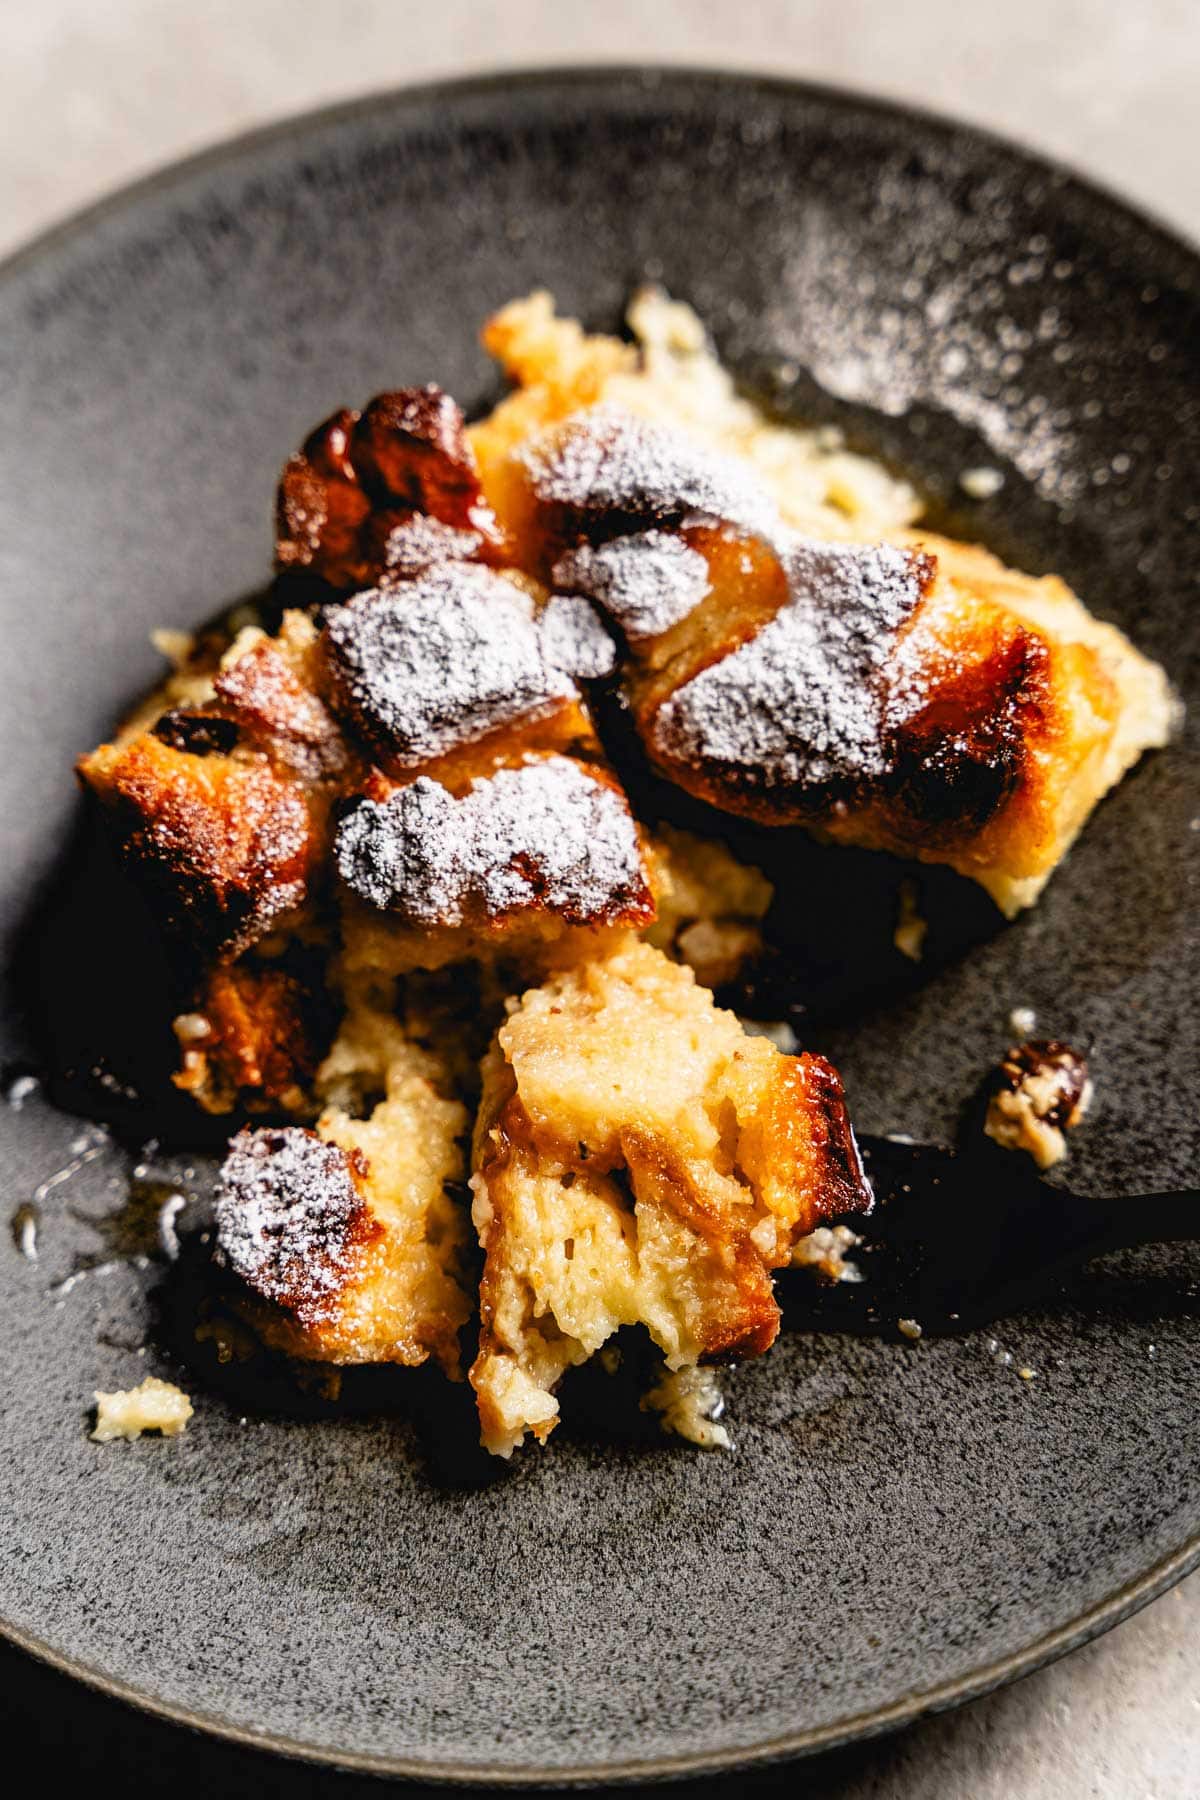 smoked bread pudding recipe on plate vertical